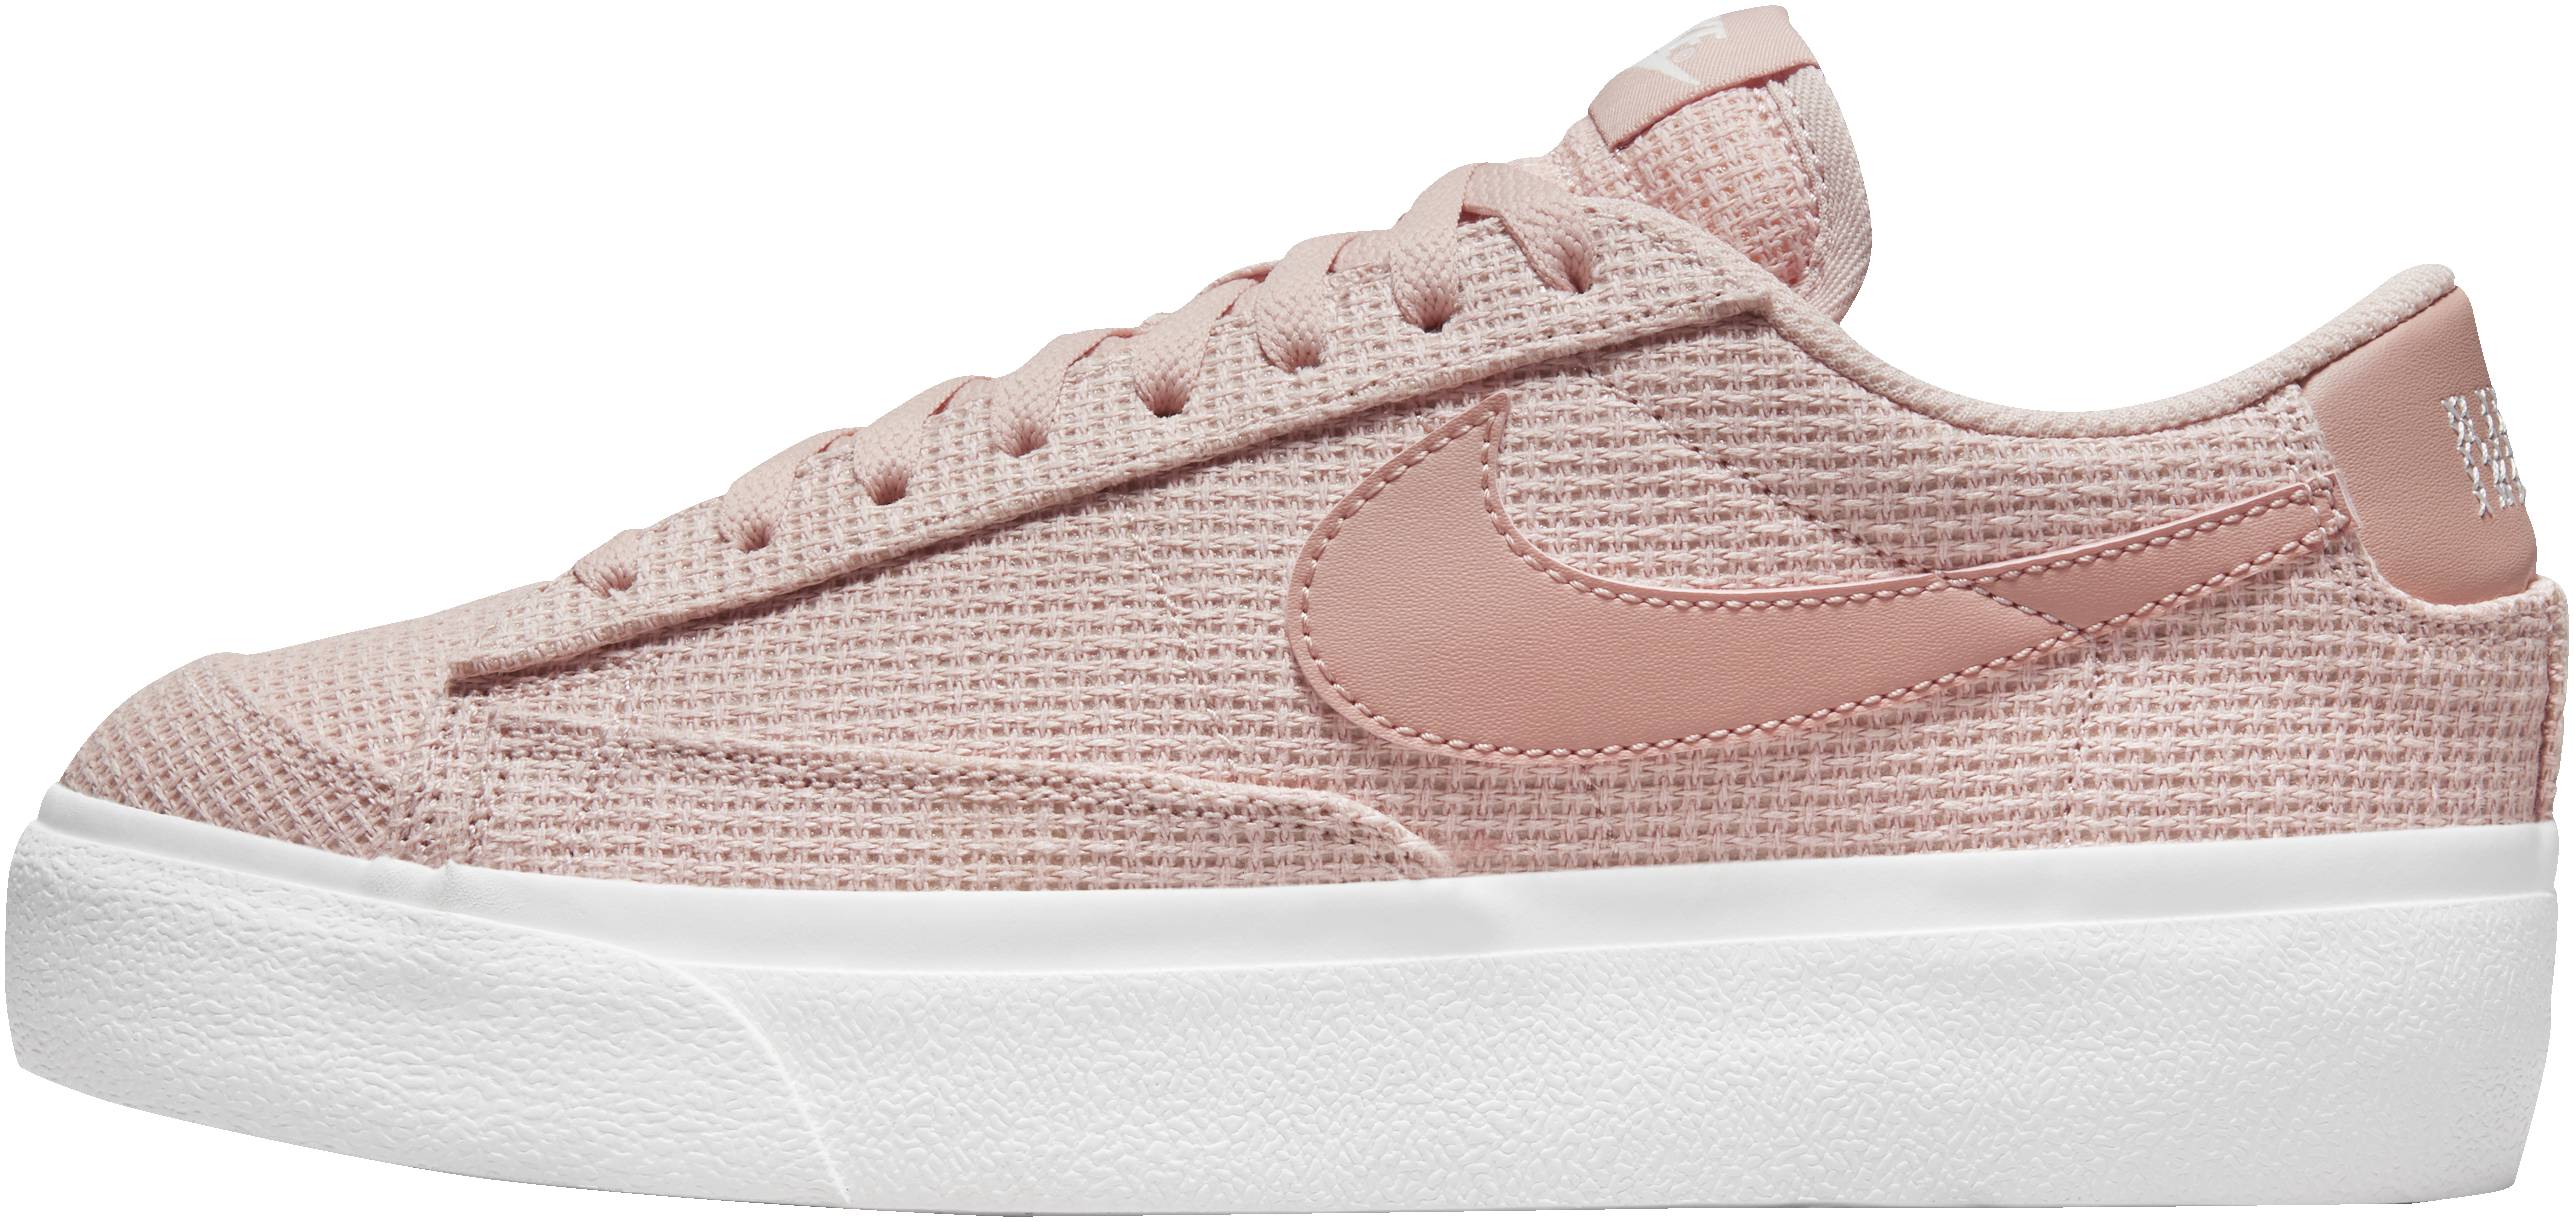 Expectation Few Draw a picture Nike Blazer Low Platform sneakers in 10+ colors (only $56) | RunRepeat